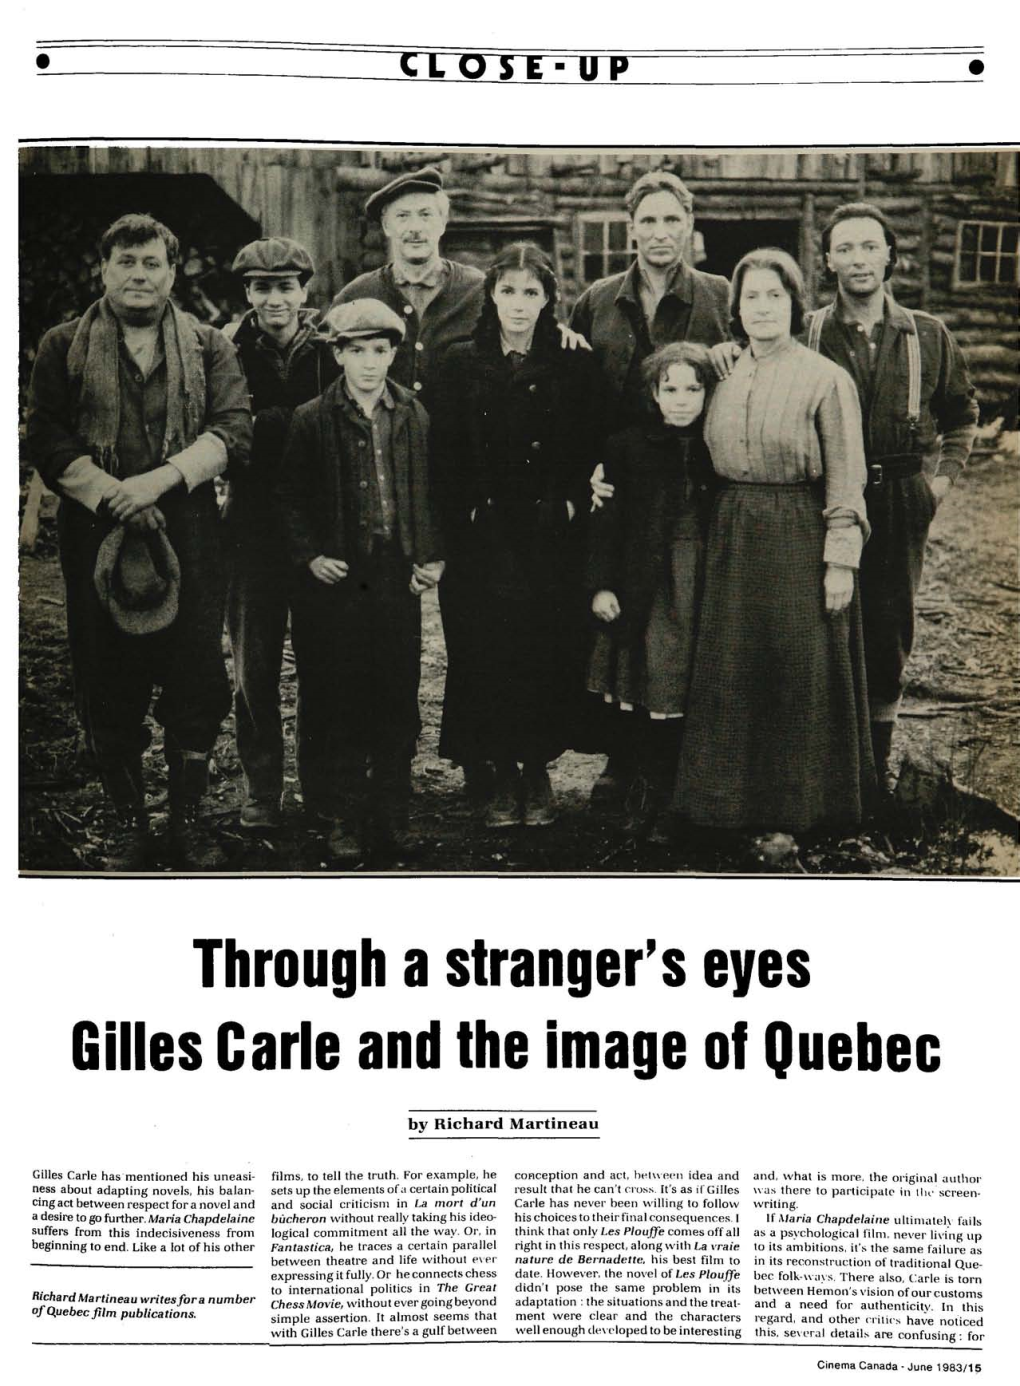 Through a Stranger's Eyes Gilles Carle and the Image of Quebec